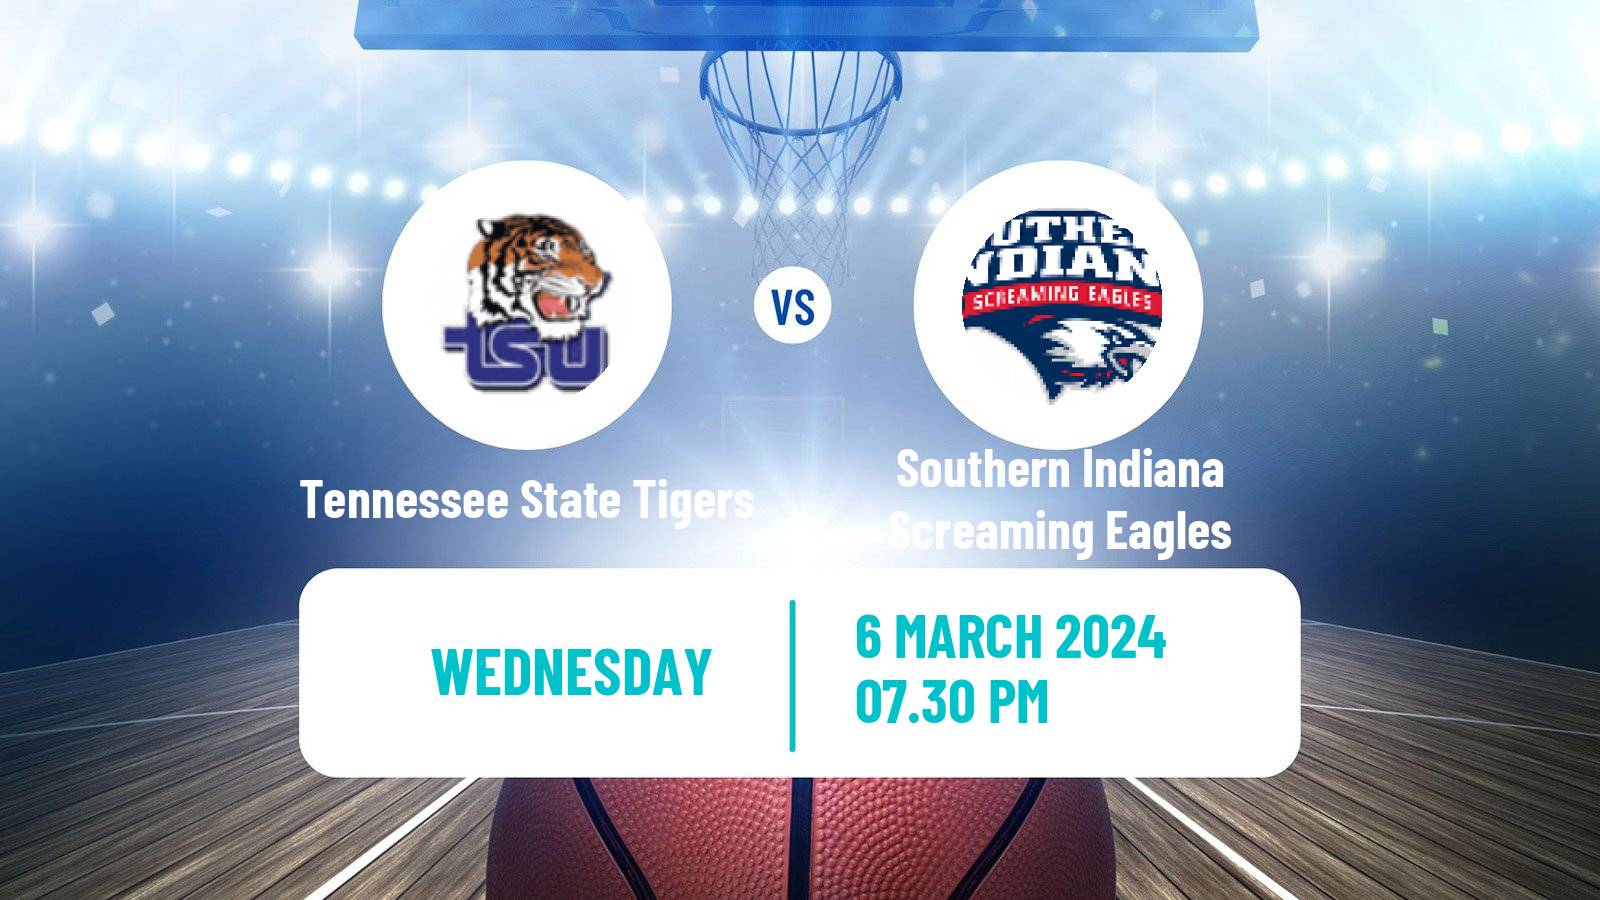 Basketball NCAA College Basketball Tennessee State Tigers - Southern Indiana Screaming Eagles